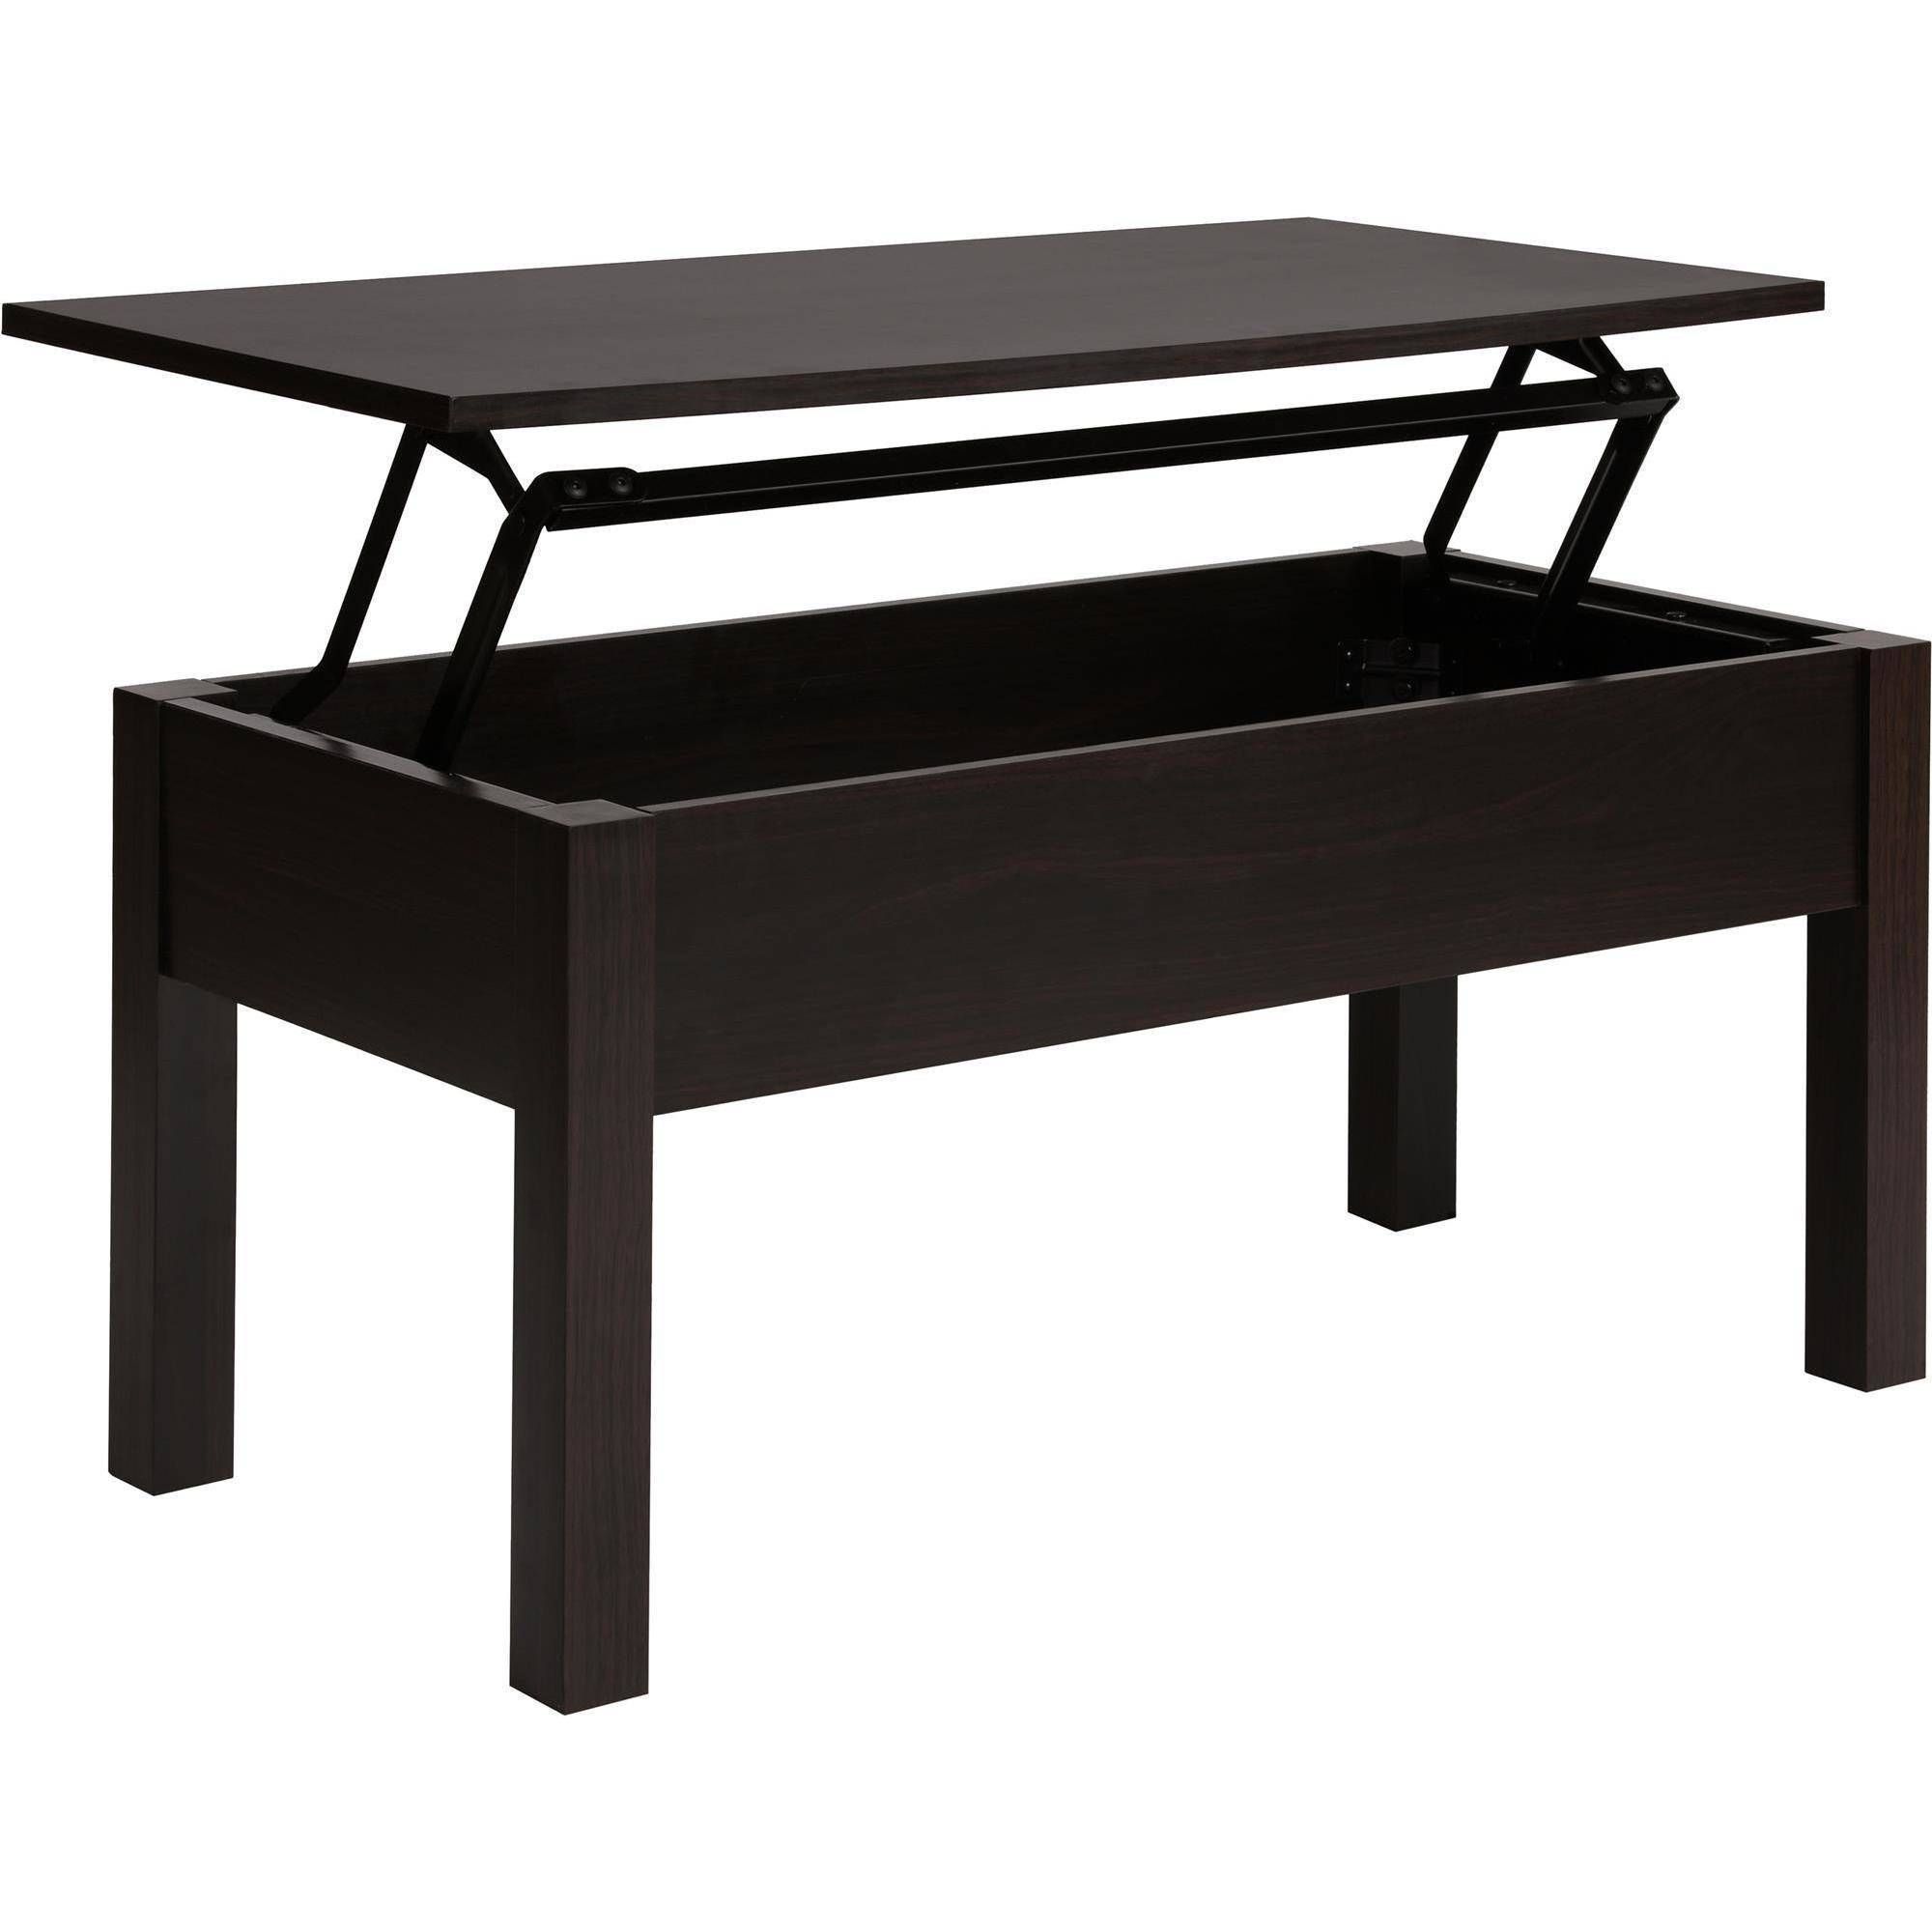 Mainstays Lift Top Coffee Table, Multiple Colors – Walmart Intended For Cheap Lift Top Coffee Tables (View 14 of 30)